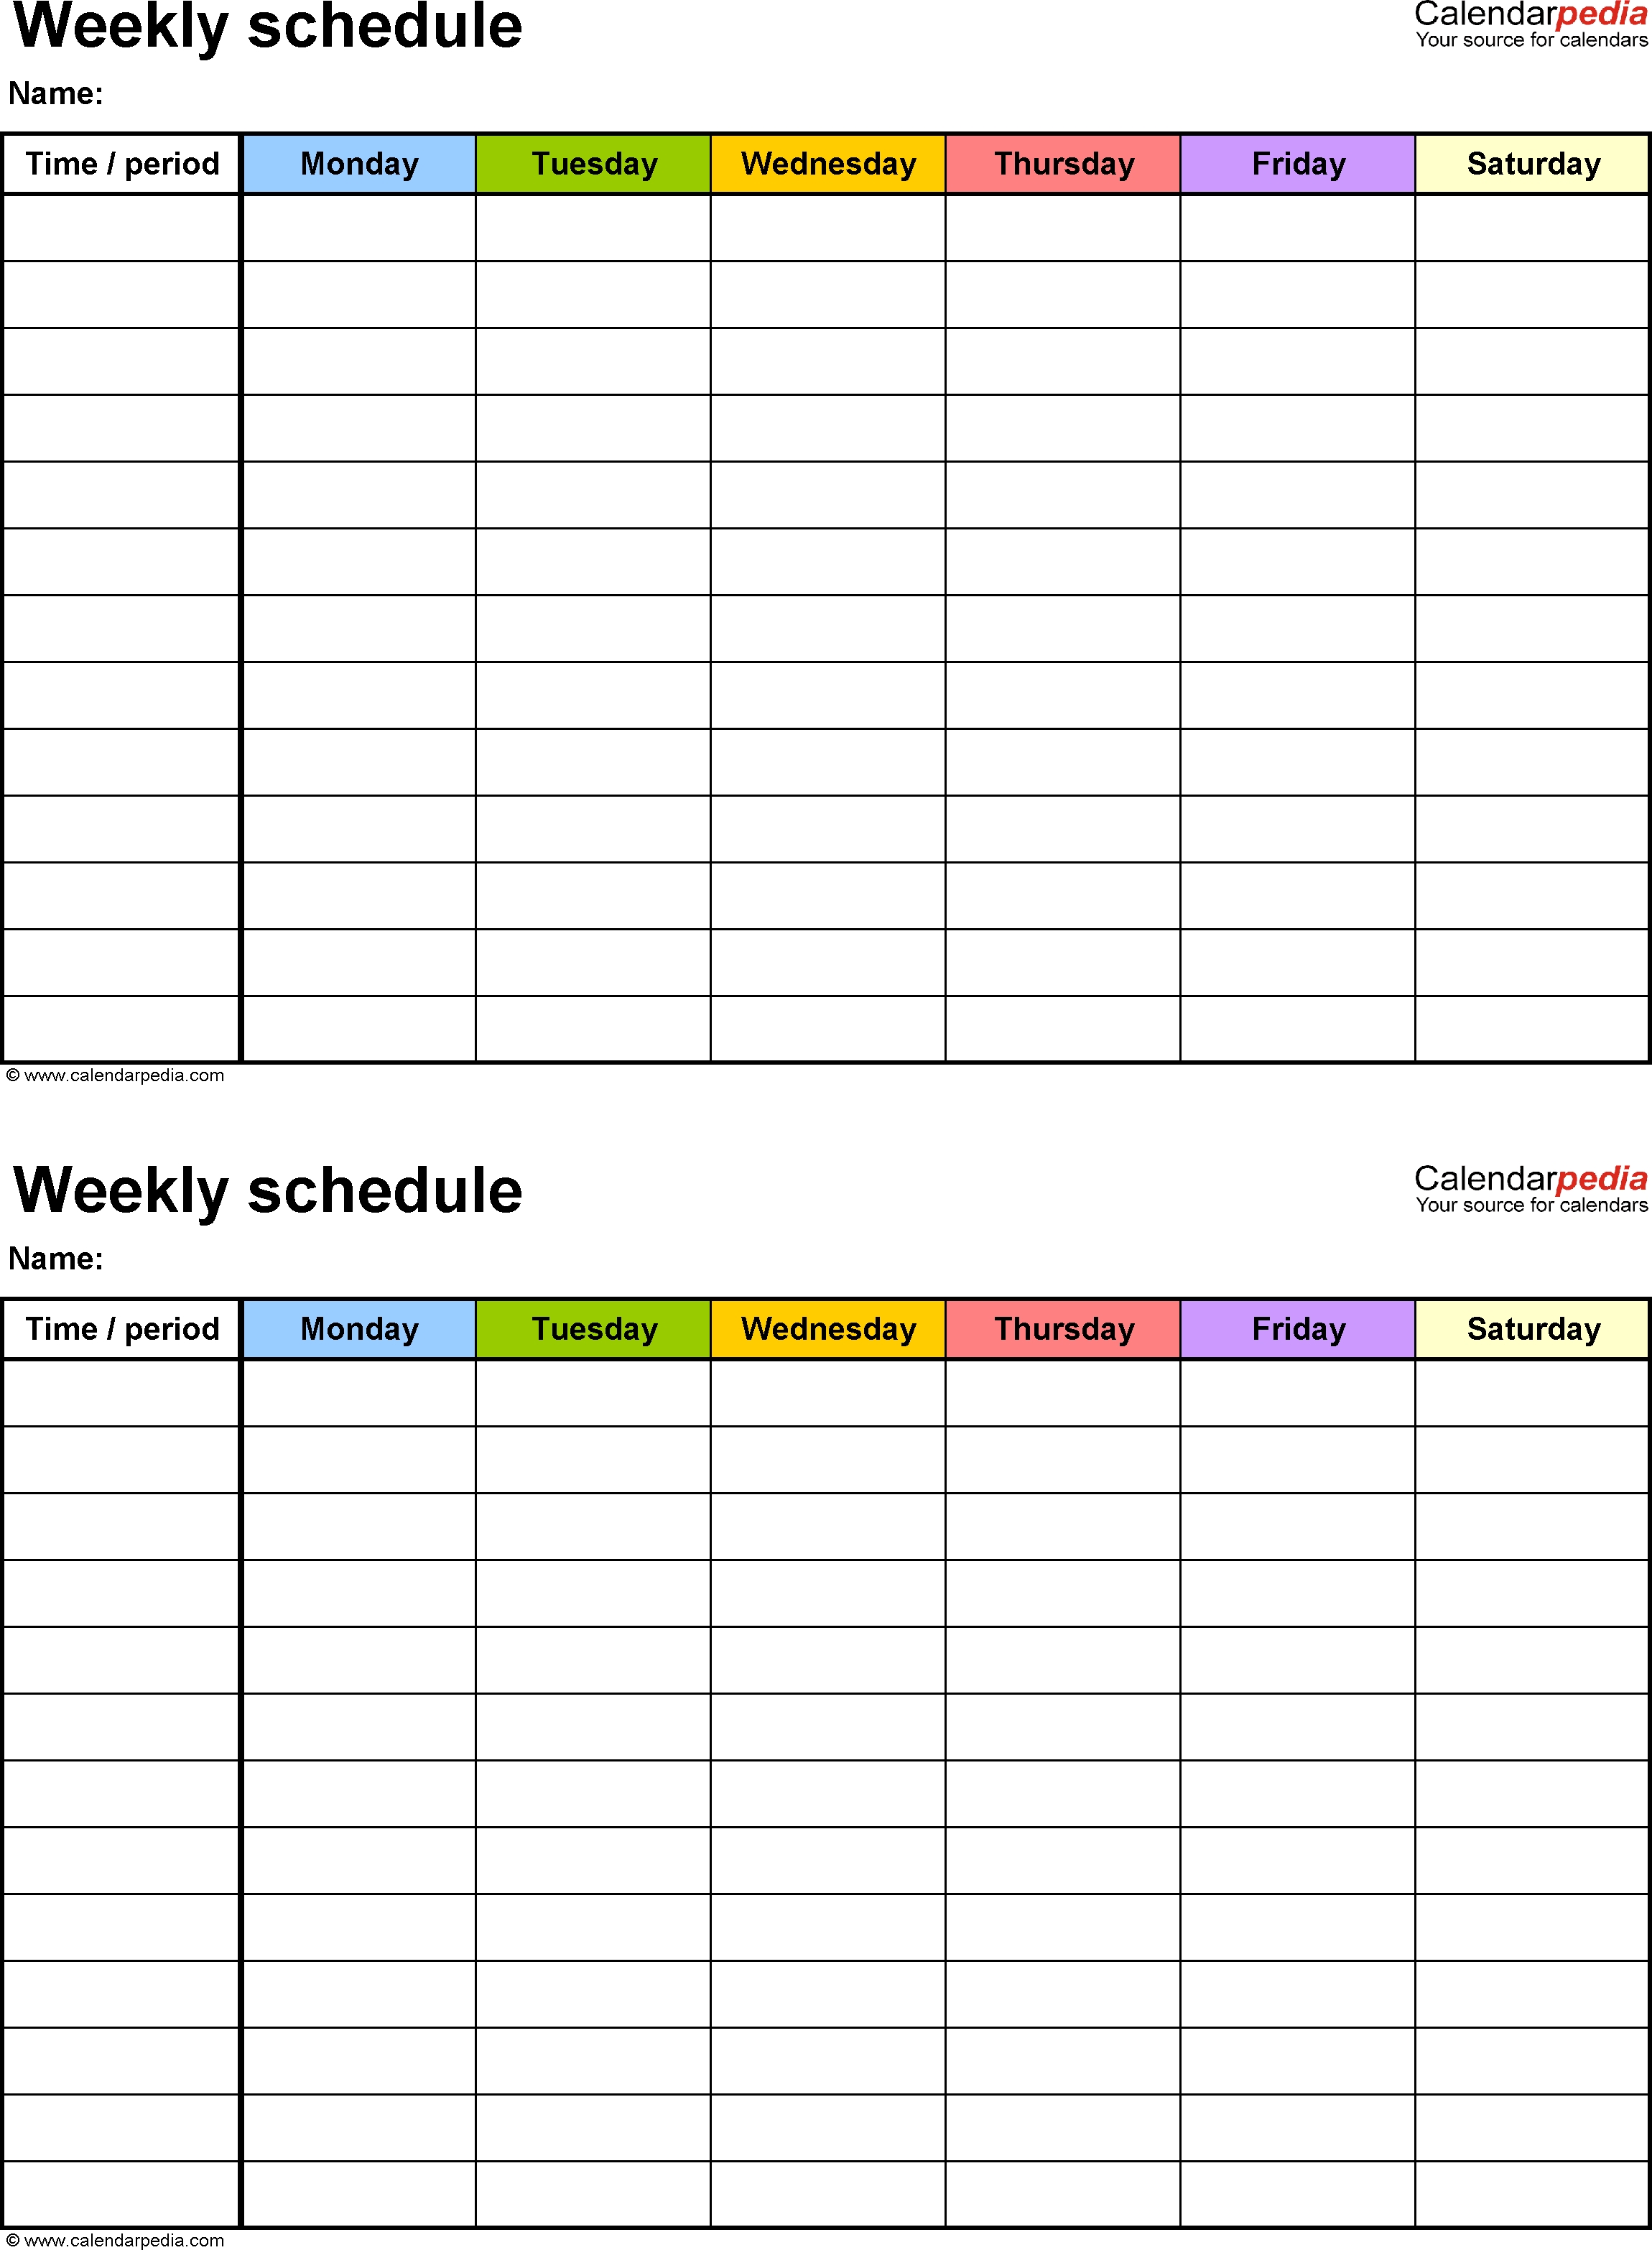 Free Weekly Schedule Templates For Word - 18 Templates  Week Schedule Template With Times